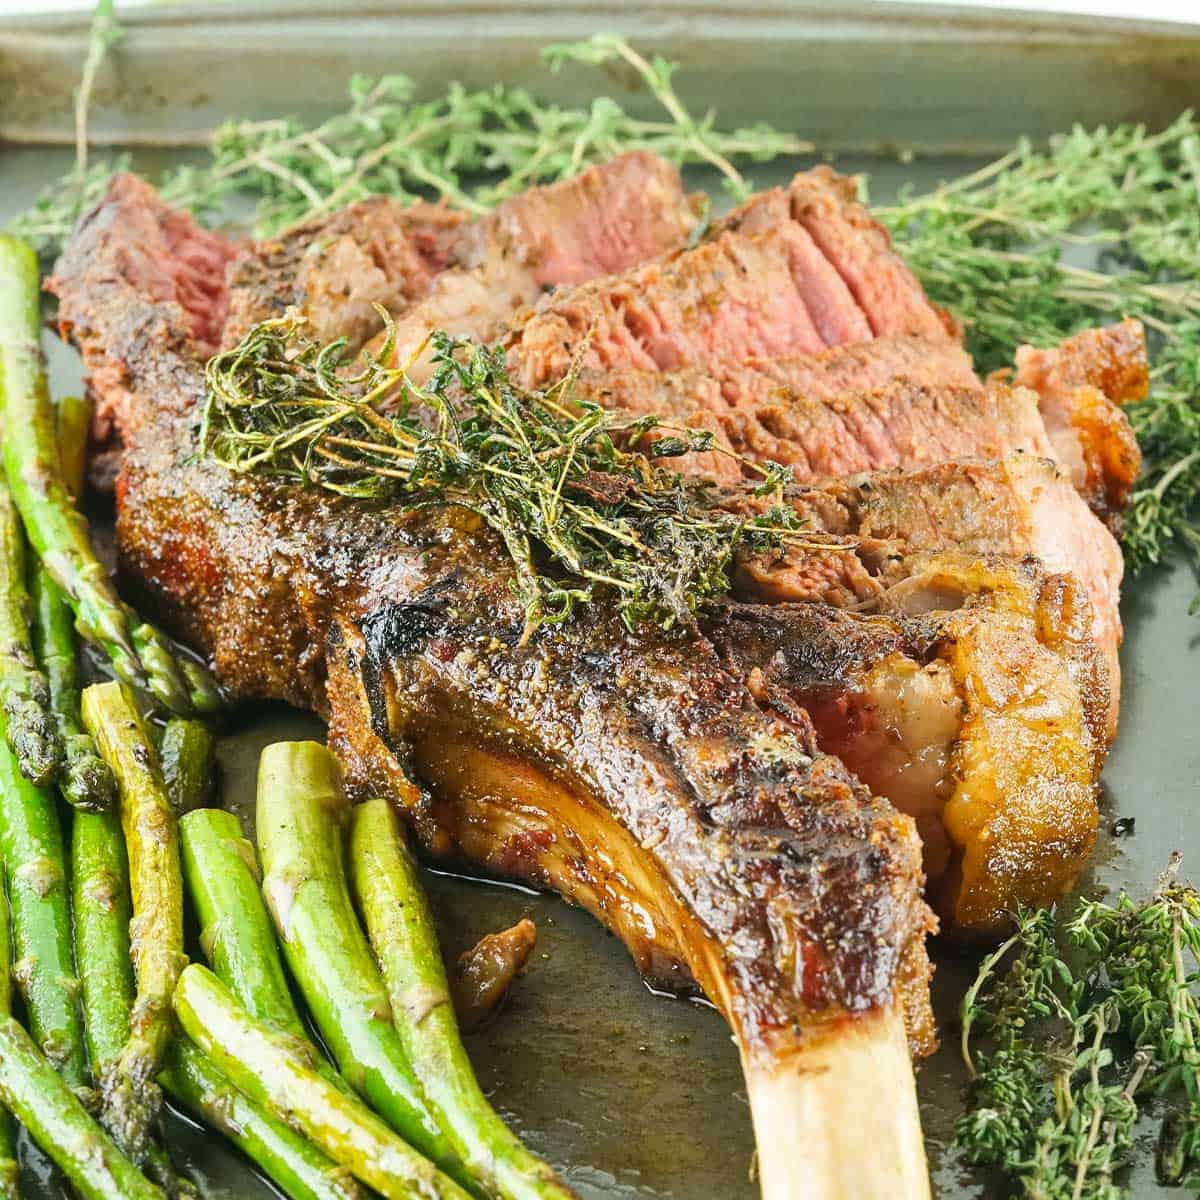 Tomahawk steak sliced on one side with asparagus and herbs